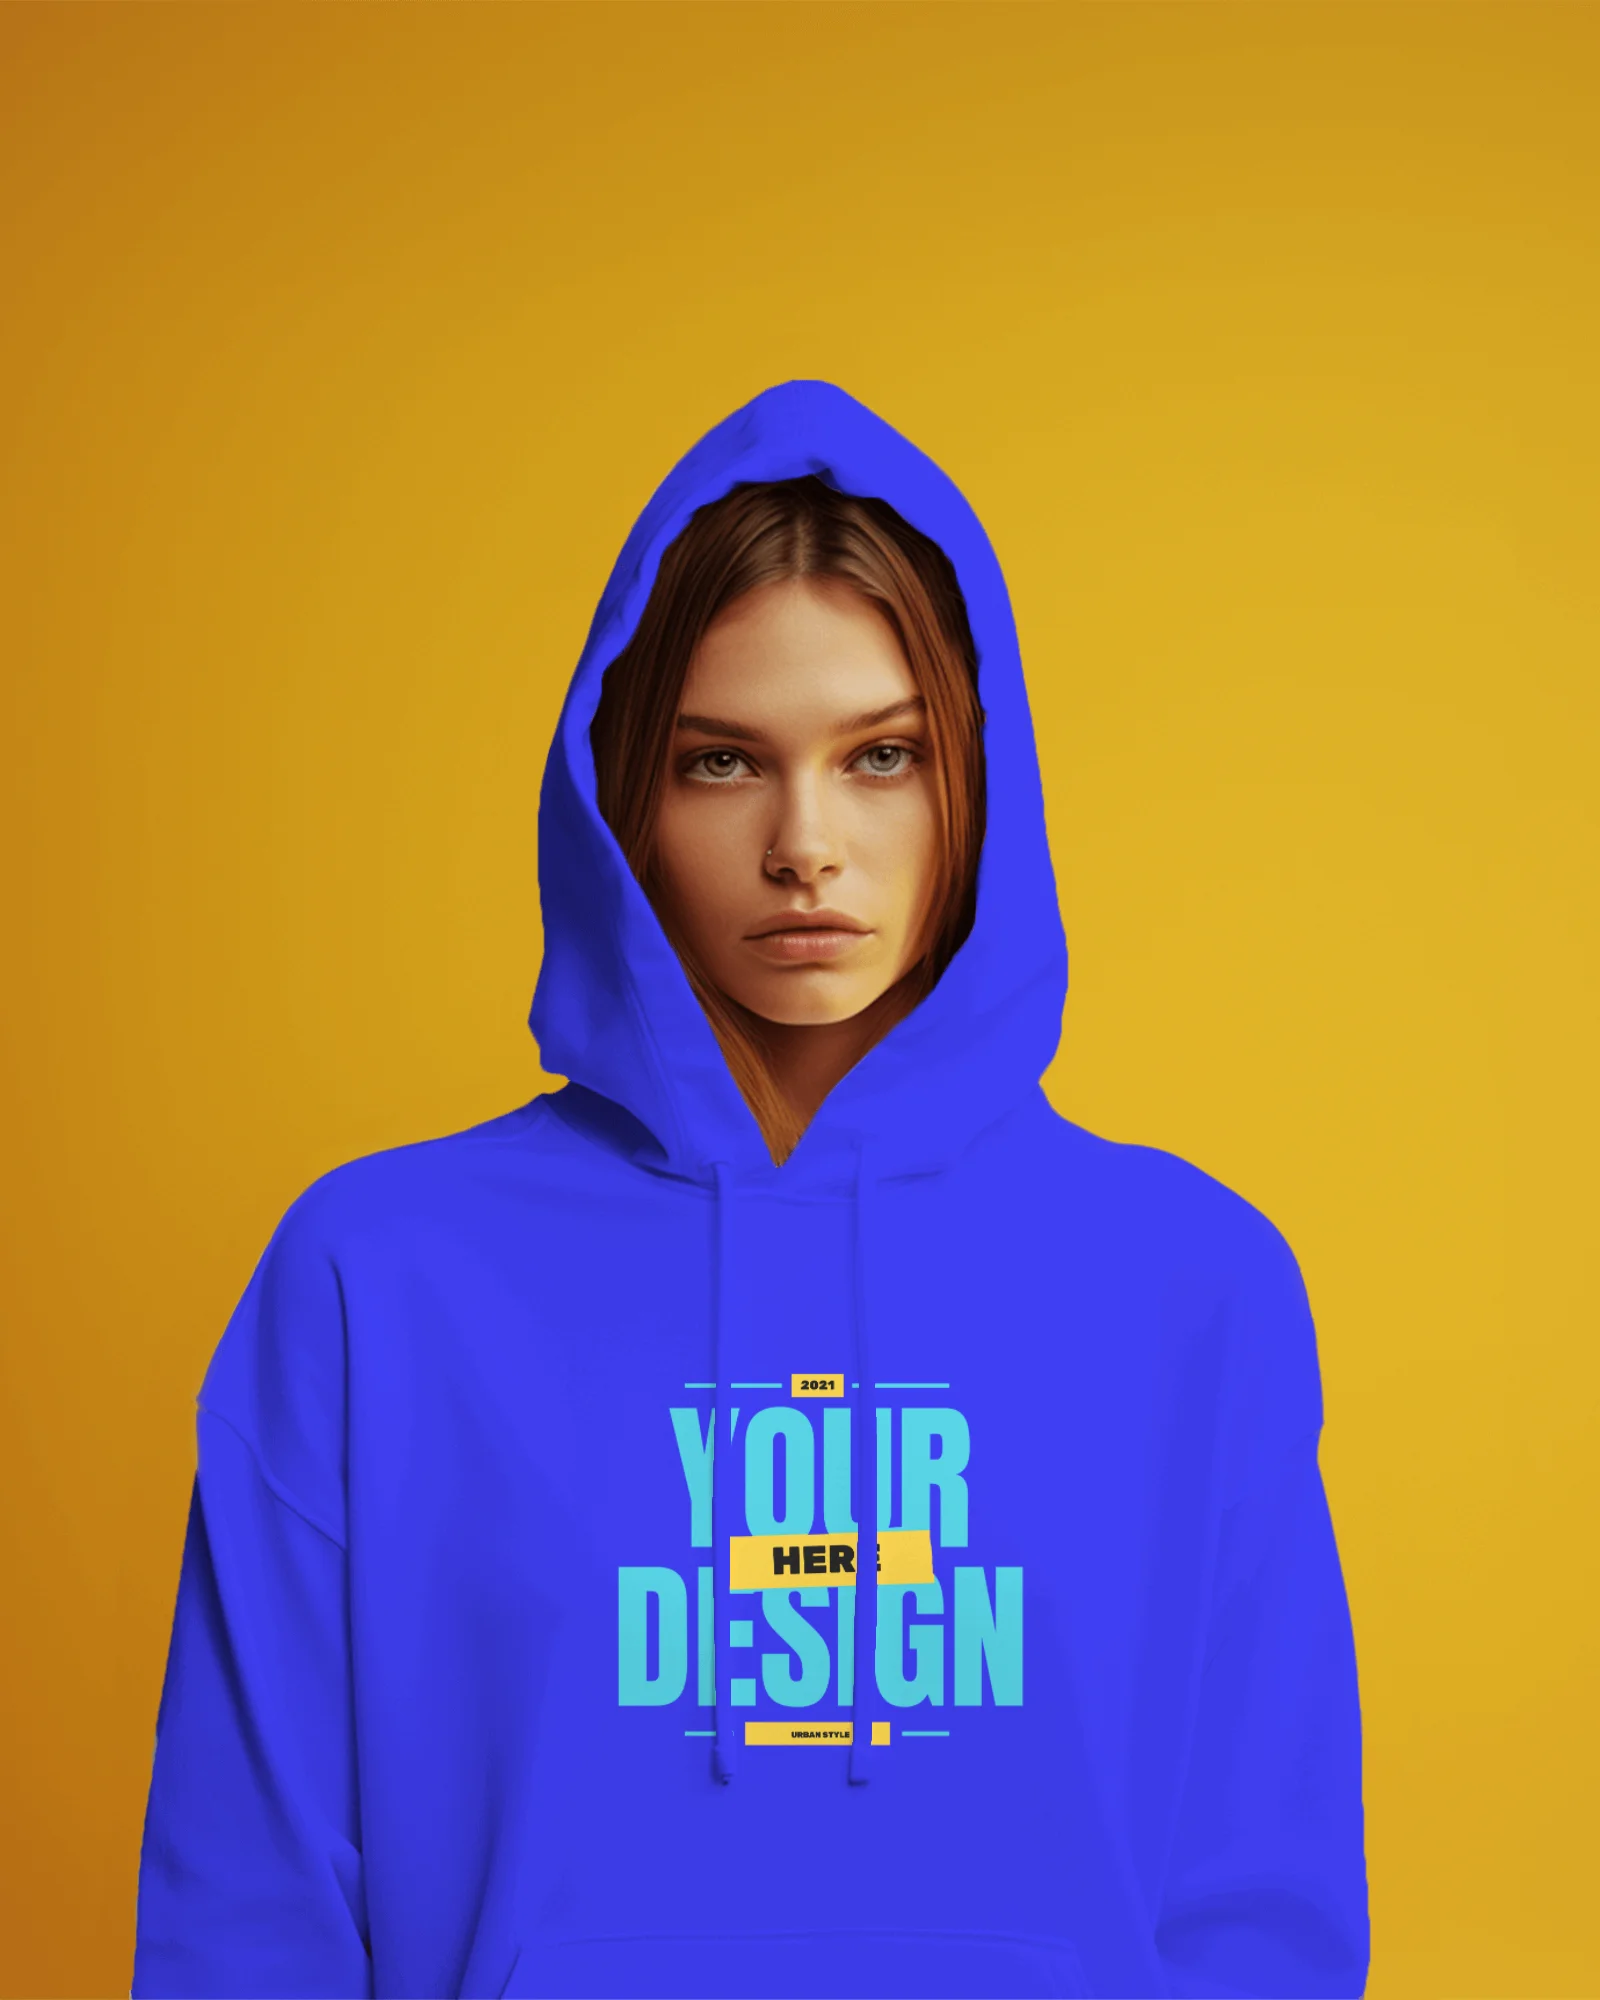 Woman wearing light blue hoodie mockup in front of yellow background